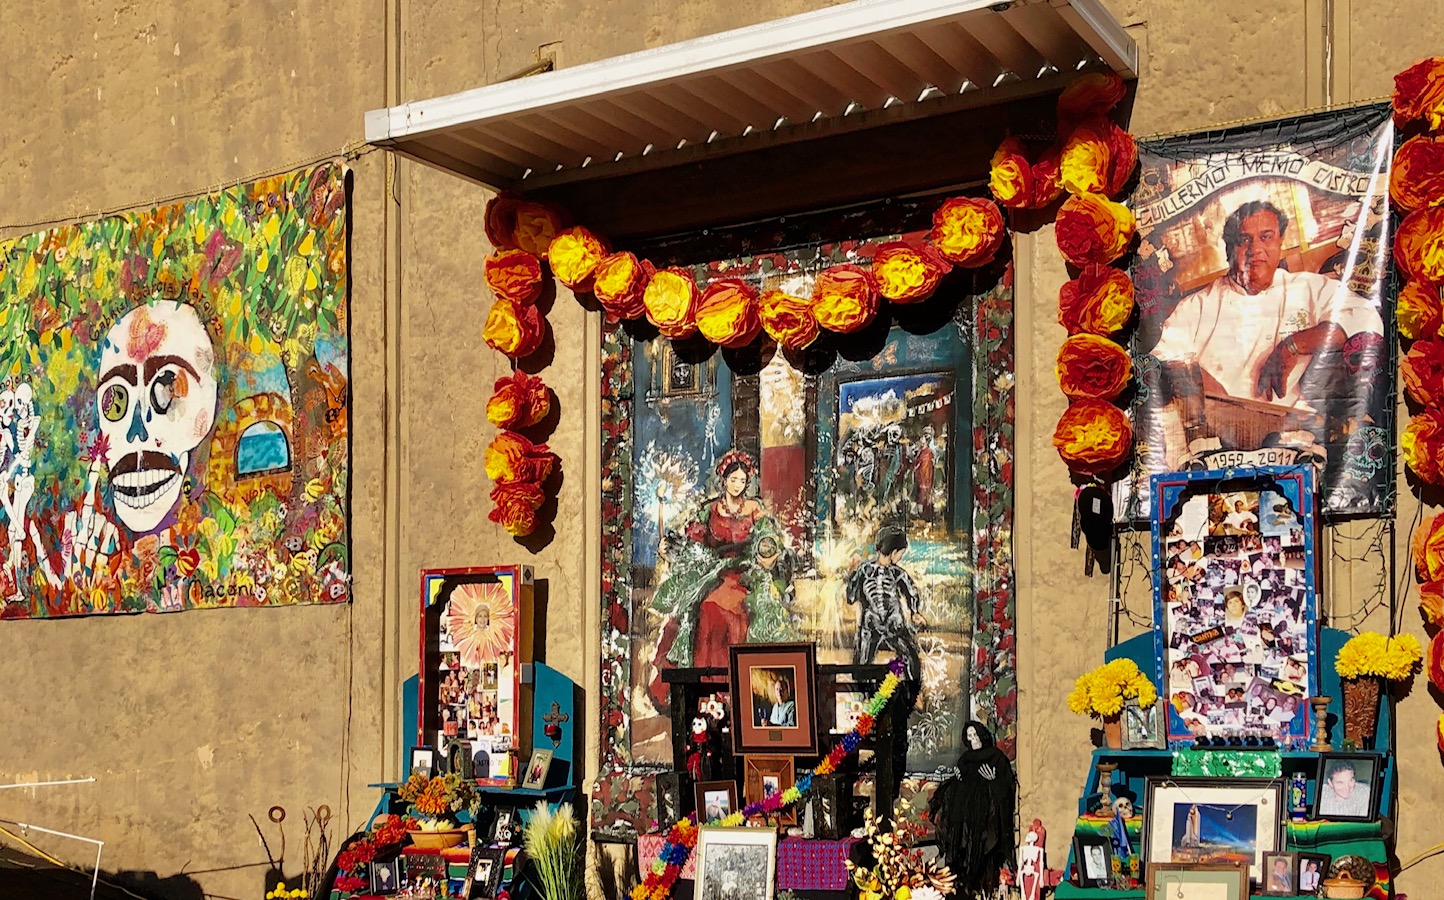 Day of the Dead 3 Discover amazing altars + more during Dia de los Muertos, Nov. 2-7 at Pepper Place